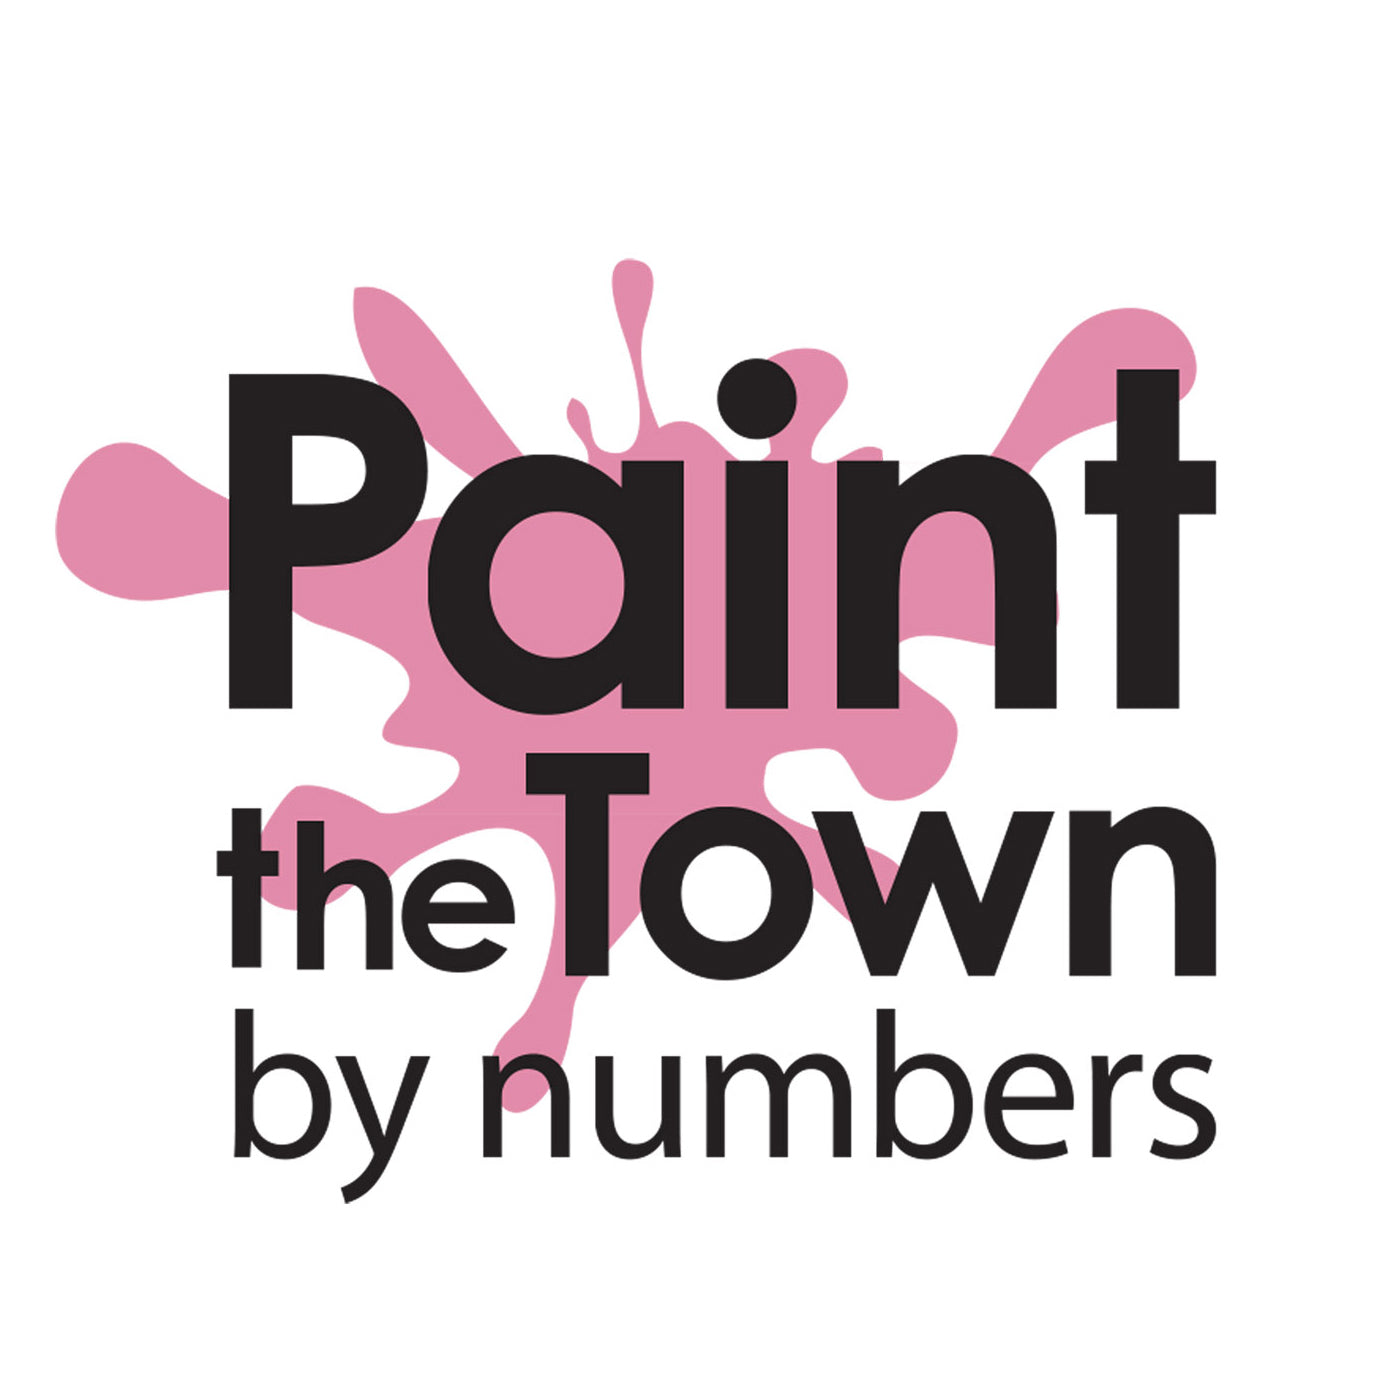 Pink Adobe Paint by Number Kit; 8”x10” – Paint the Town by Numbers